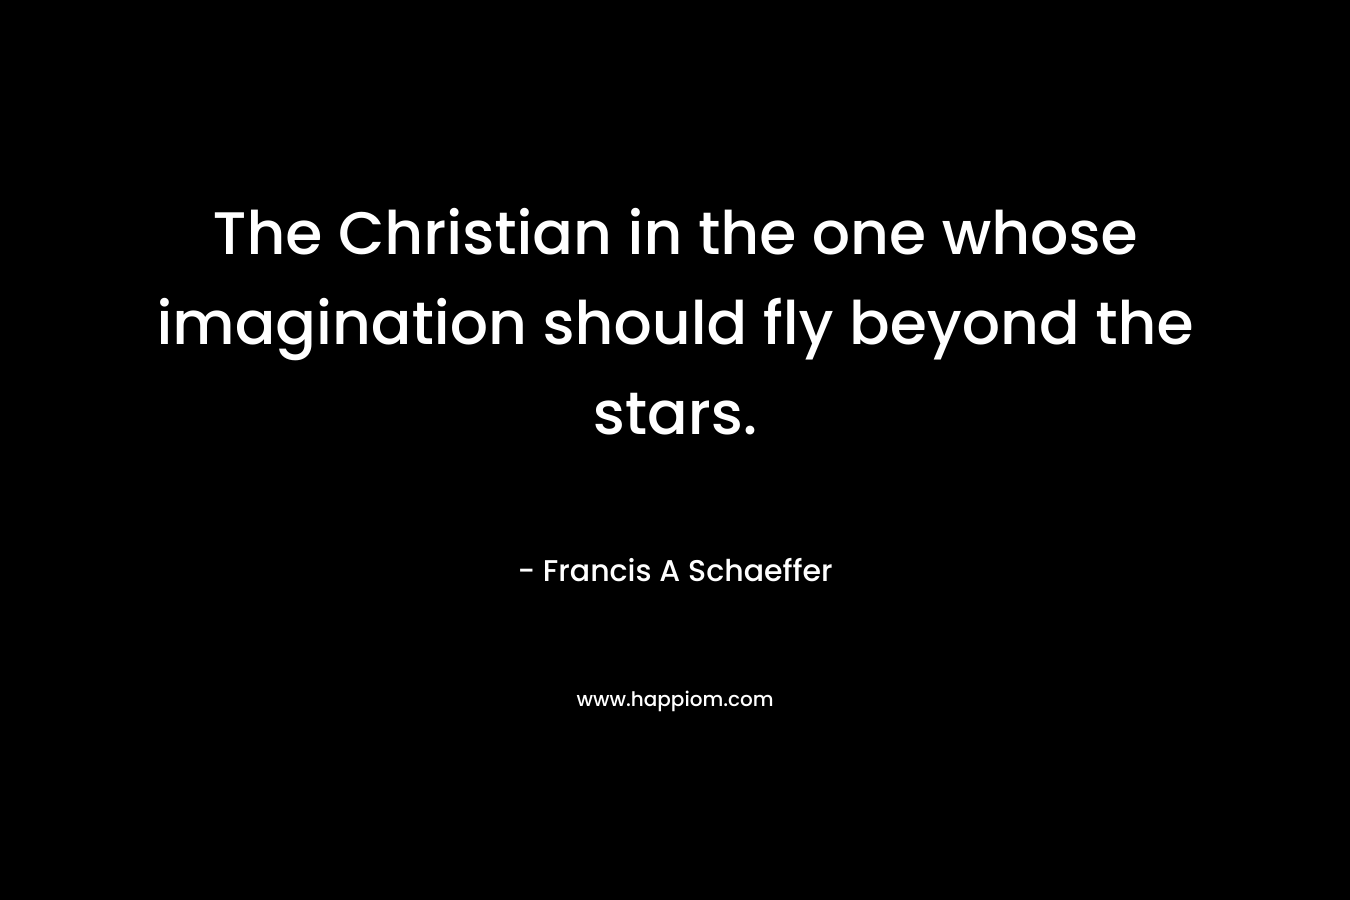 The Christian in the one whose imagination should fly beyond the stars. – Francis A Schaeffer